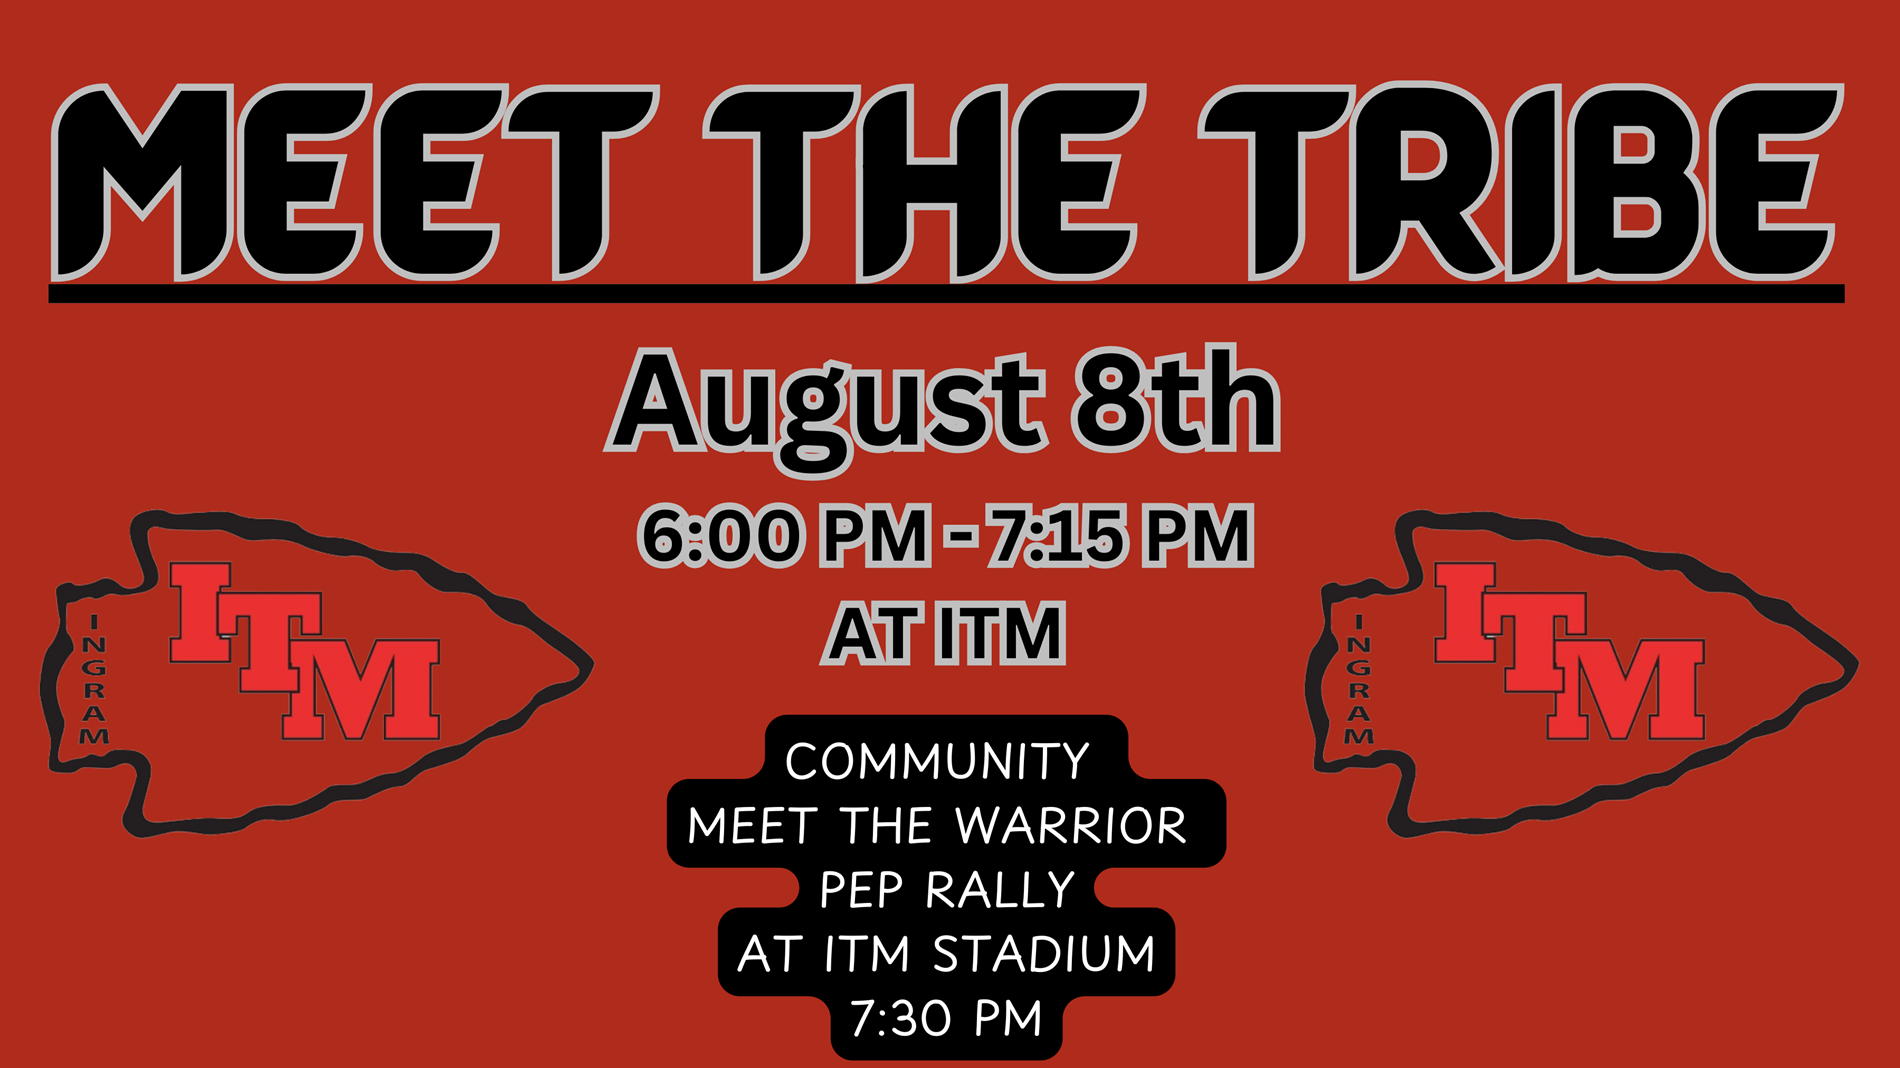 meet the tribe August 8 at 7:30 at ITM